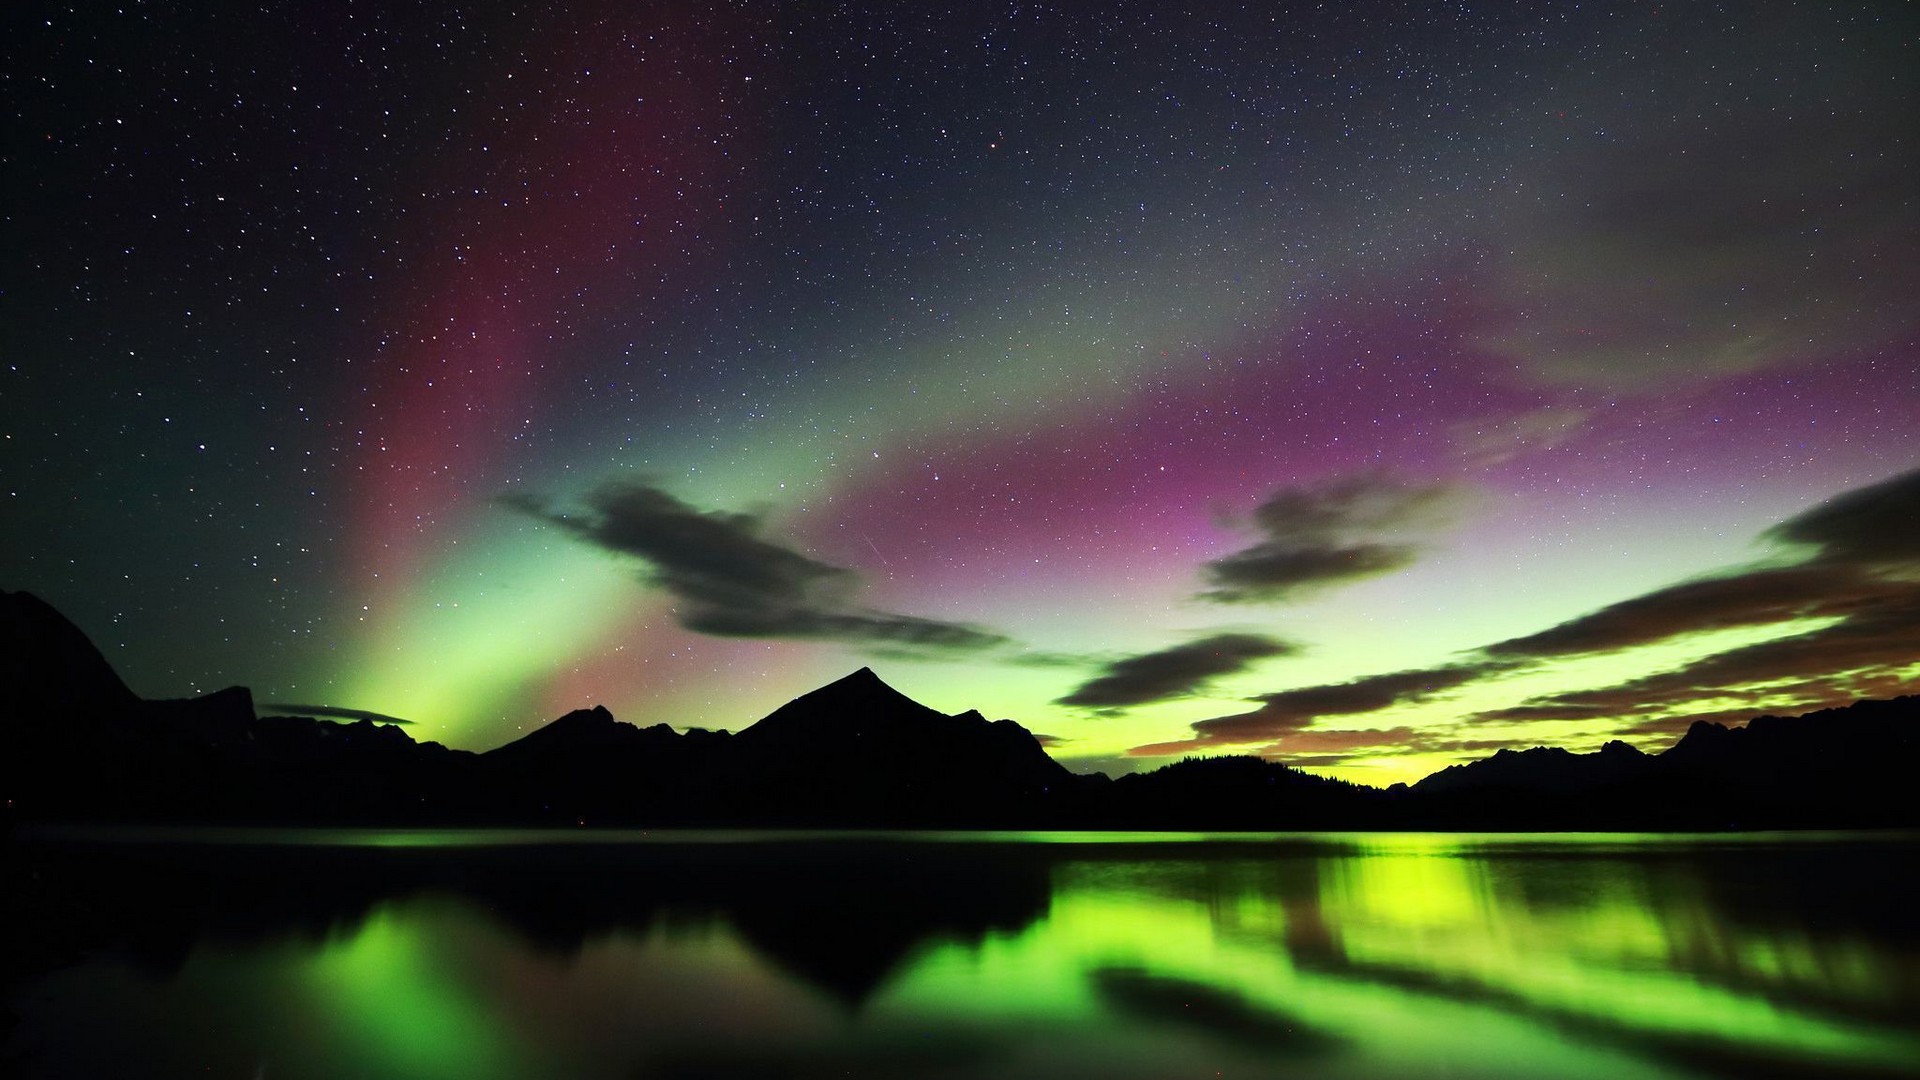 Best Aurora Wallpaper With high-resolution 1920X1080 pixel. You can use this wallpaper for your Windows and Mac OS computers as well as your Android and iPhone smartphones